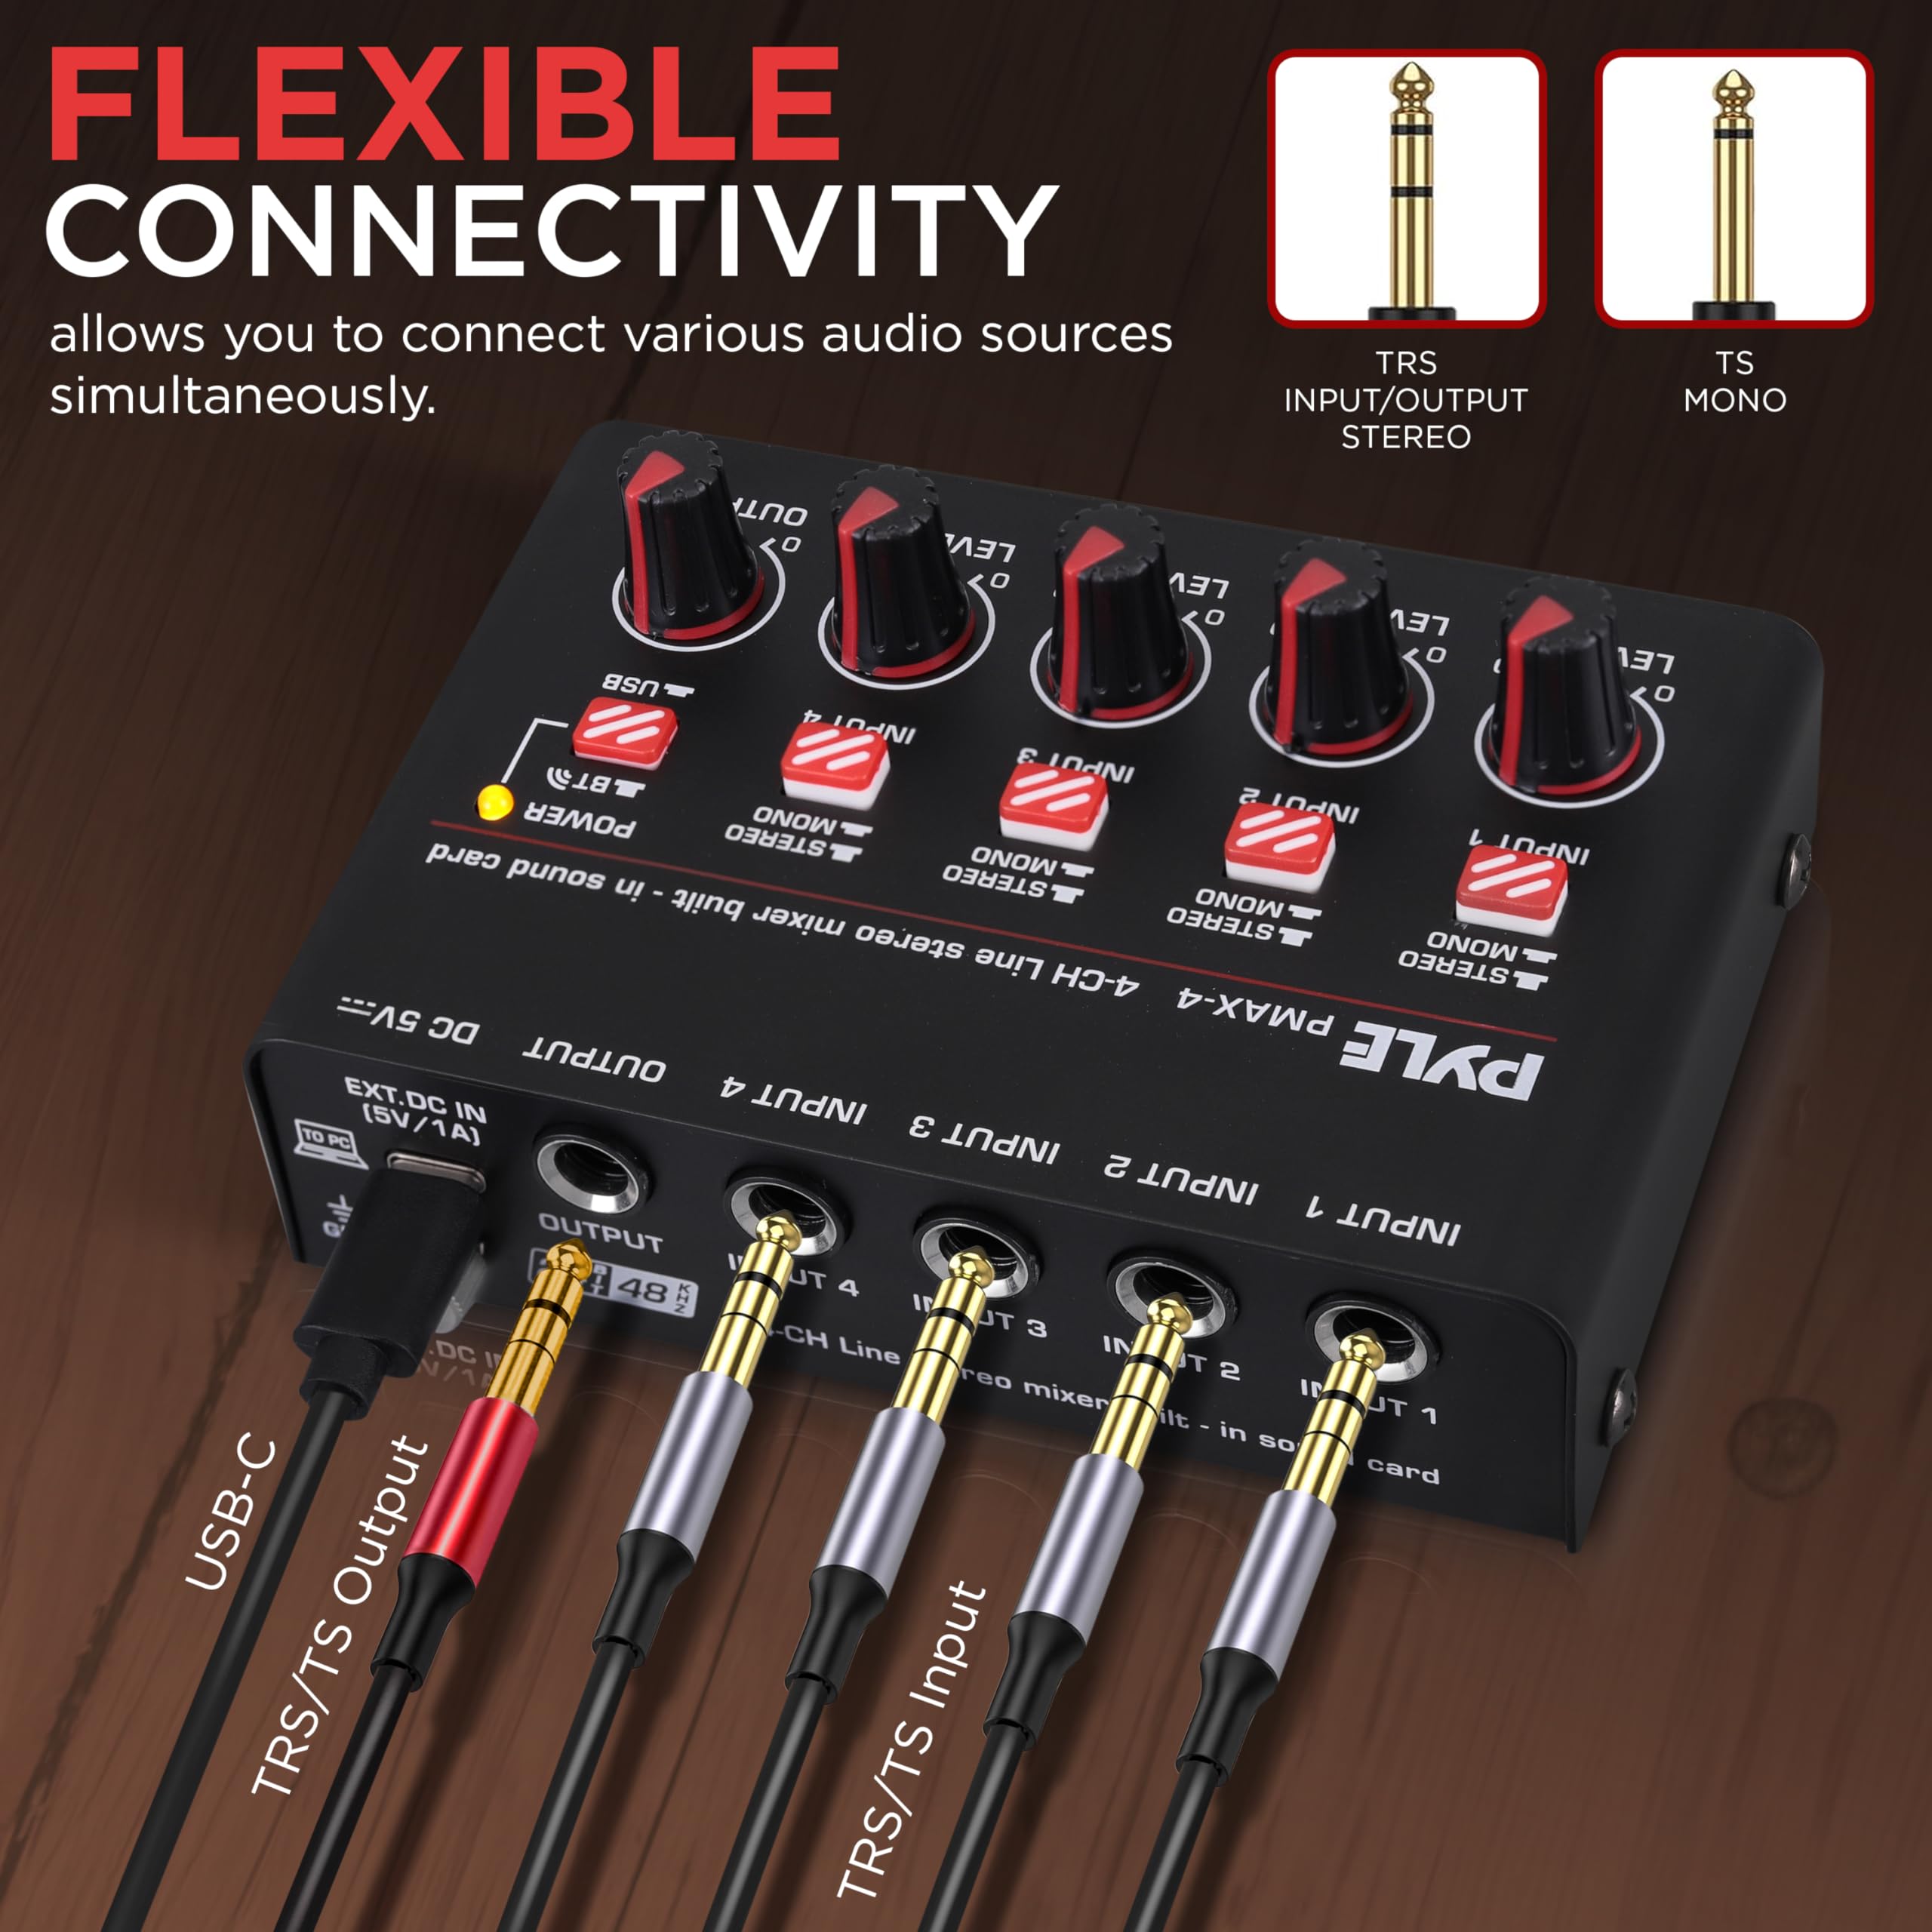 4-Channel Wireless BT Streaming Mini Line Mixer with USB Audio Interface - 4 Mono/Stereo Switching Inputs | Ultra-low Noise Design with High Headroom | Built-in USB Sound Card